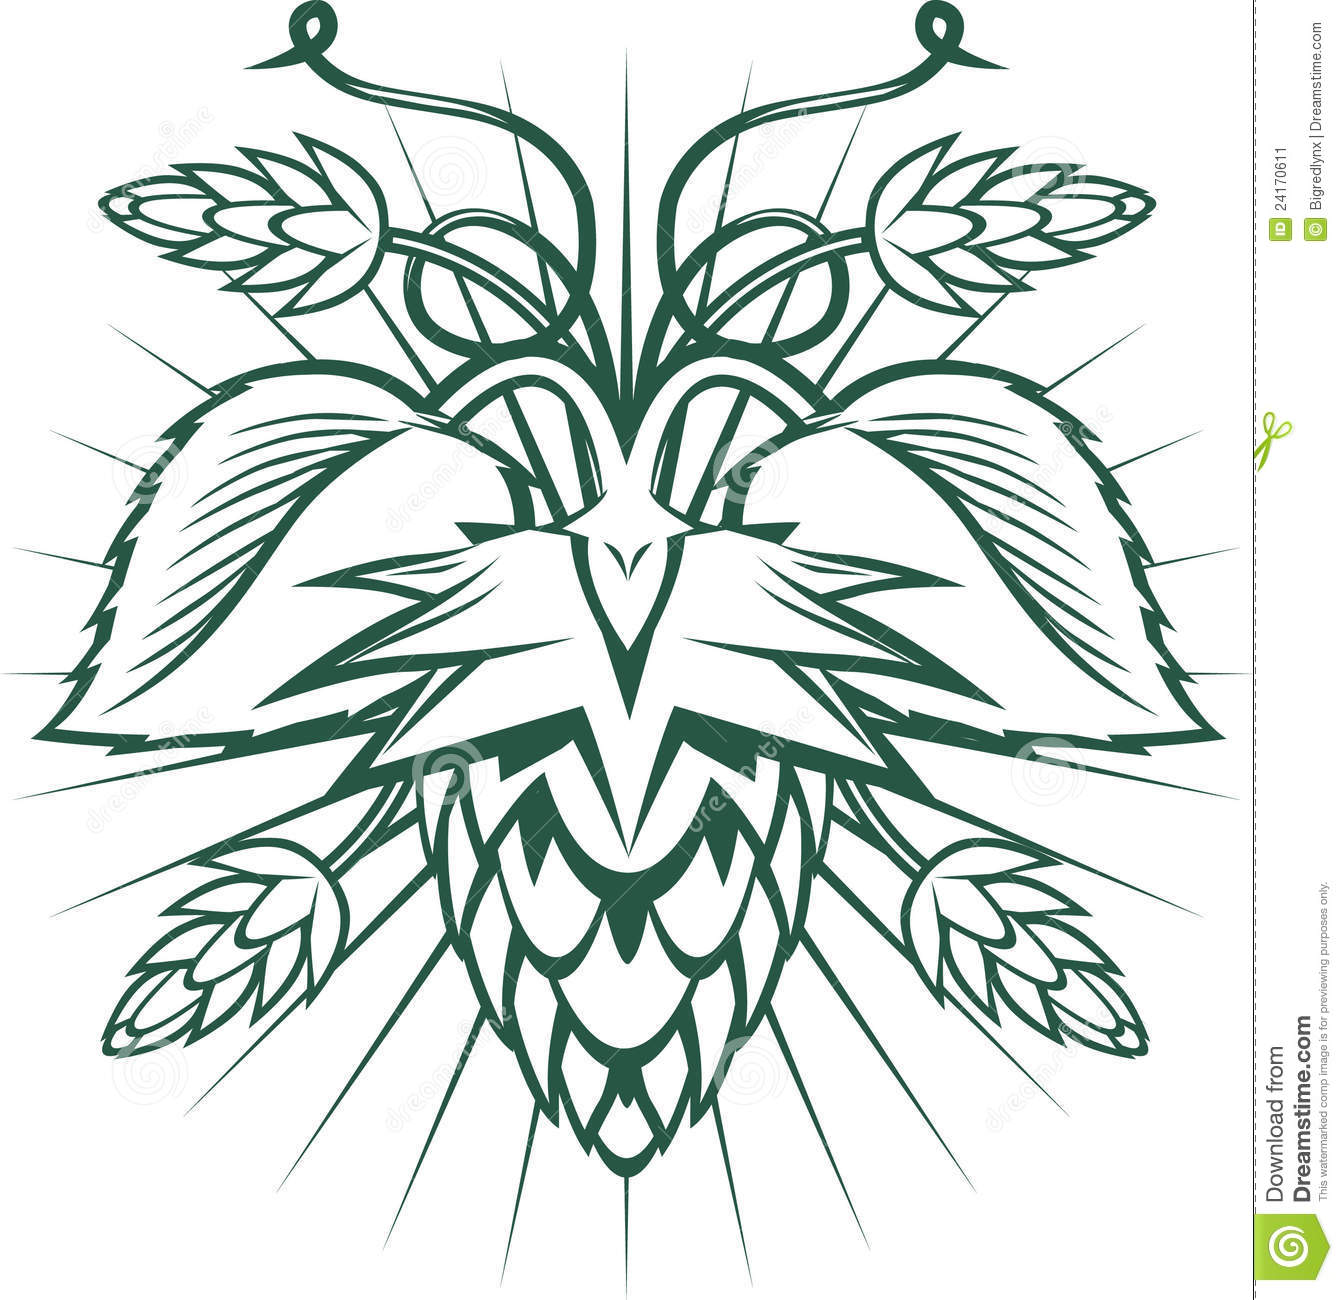 Hops Themed Ornament With Leaves And Pods